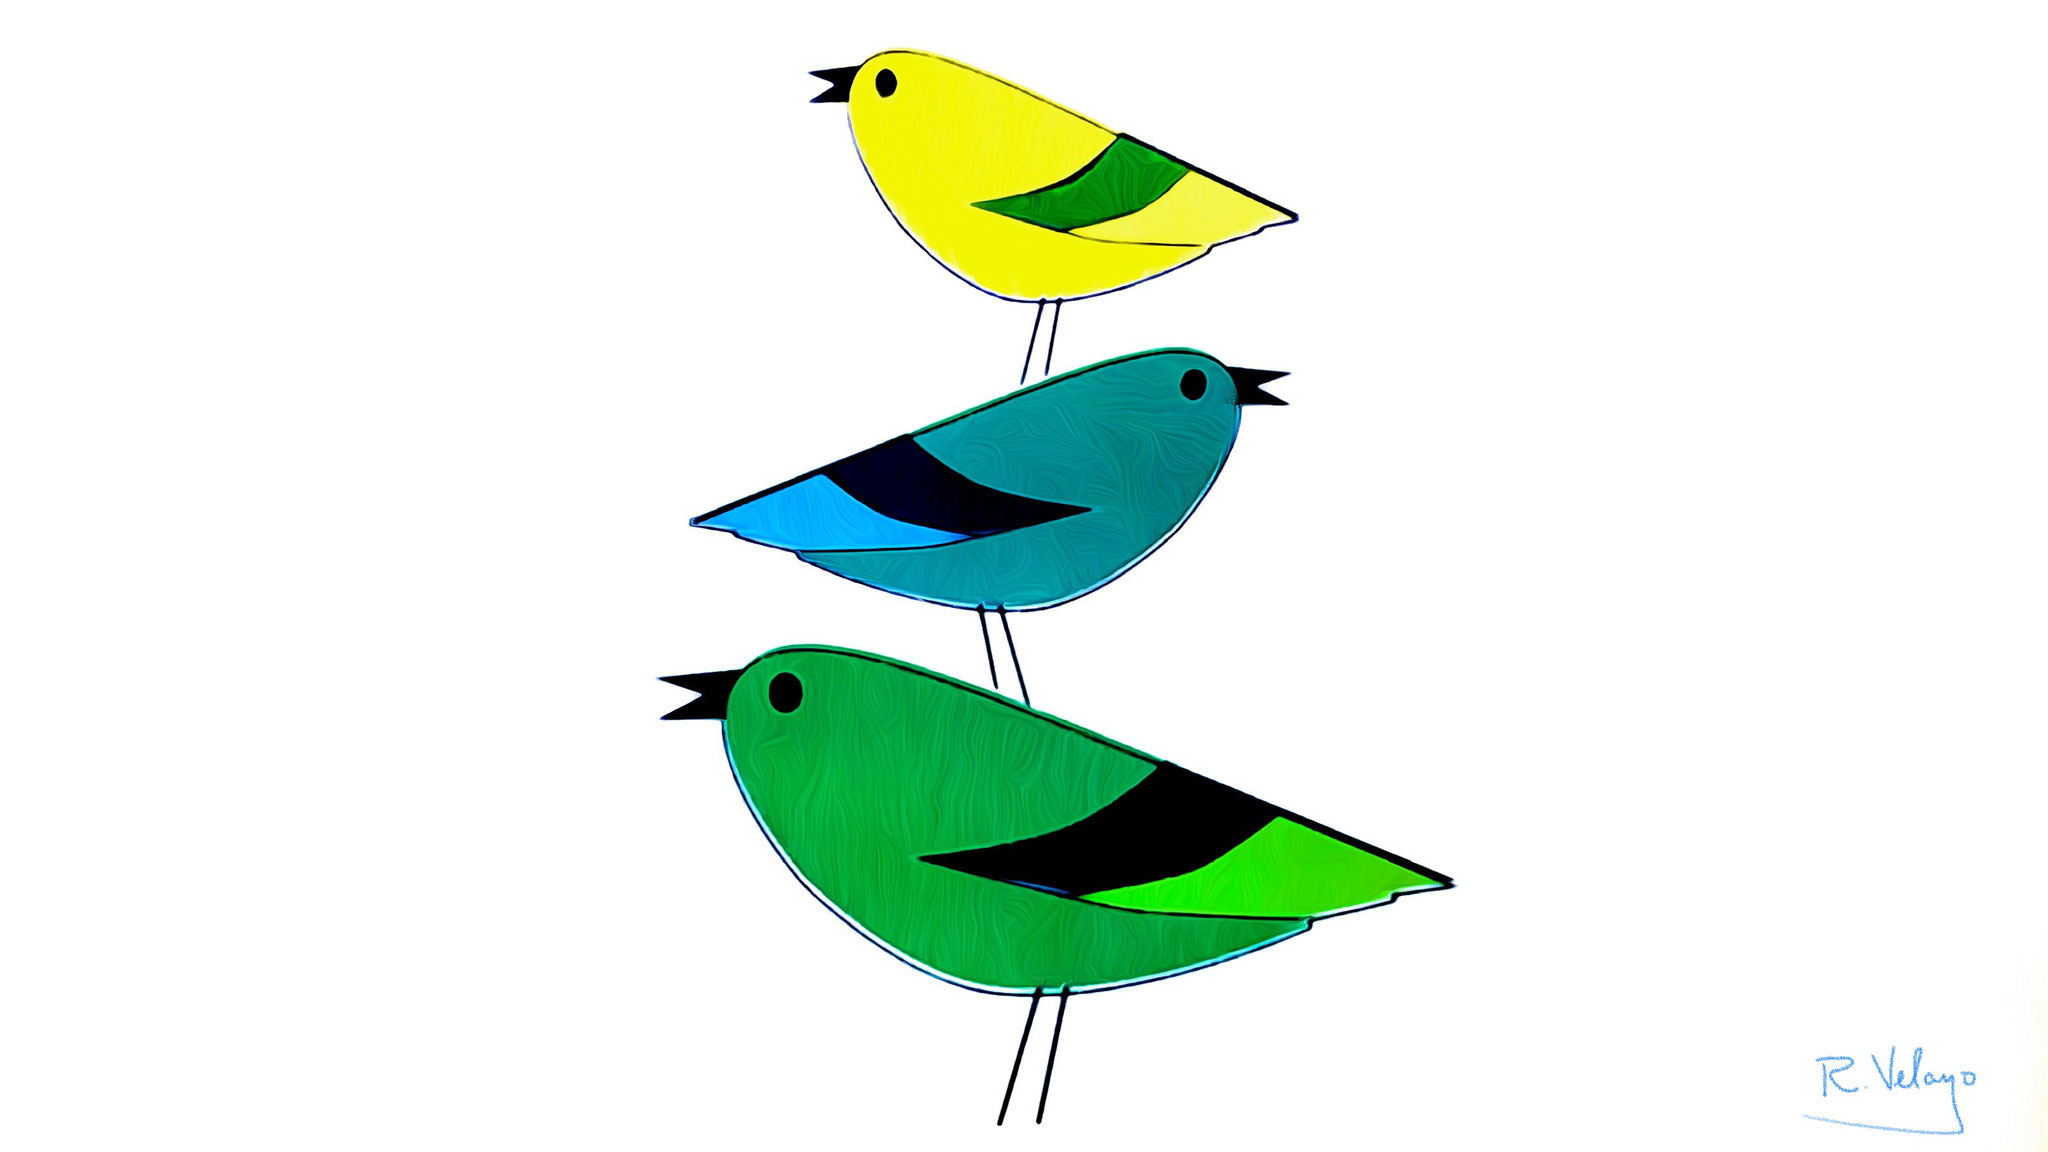 "YELLOW, BLUE, AND GREEN BIRD" [Created: 11/19/2021]